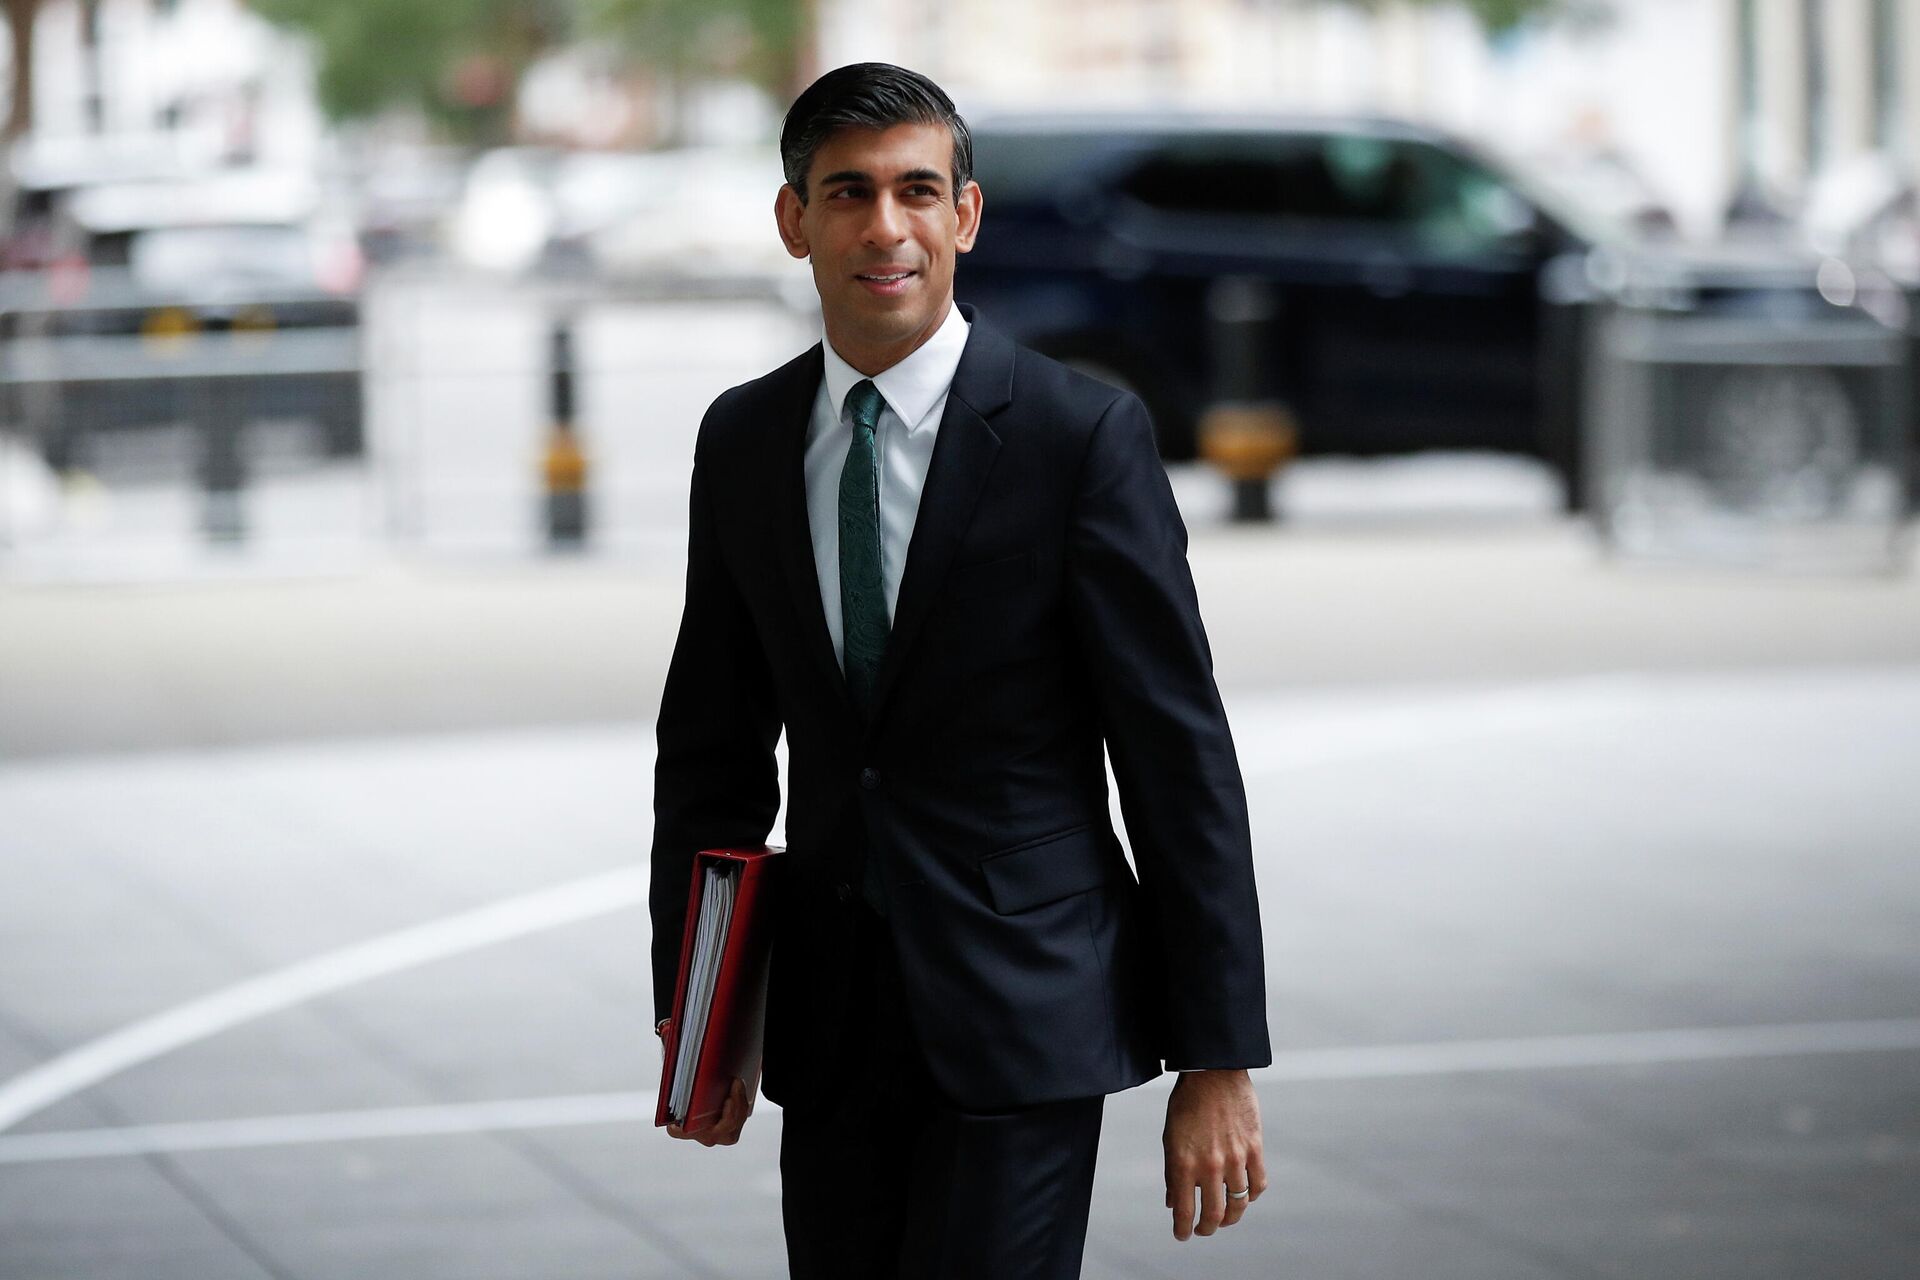 Britain's Chancellor of the Exchequer Rishi Sunak arrives at Broadcasting House to take part in an interview on BBC's 'The Andrew Marr Show', in London, Britain, October 24, 2021 - Sputnik International, 1920, 12.11.2021